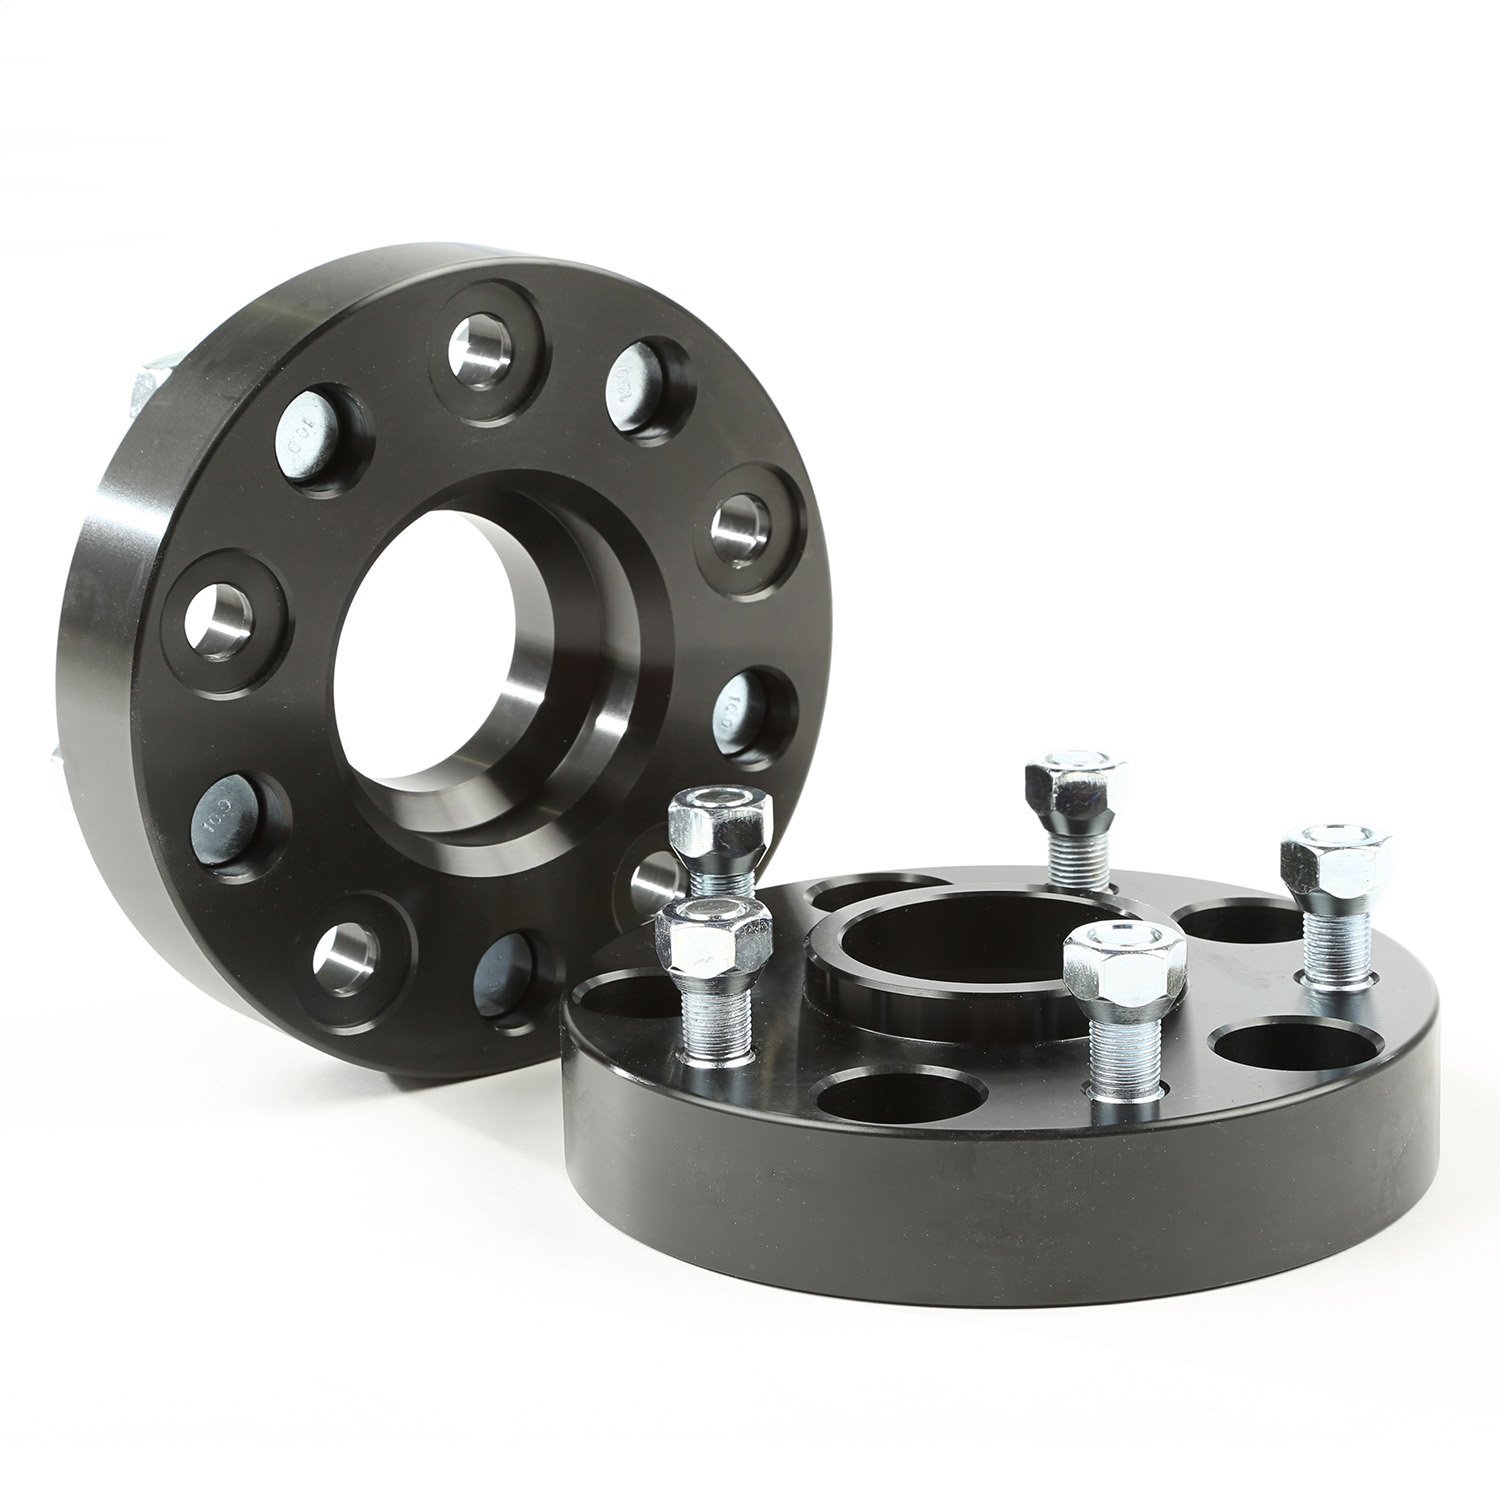 WHEEL SPACERS 1.25 INCH